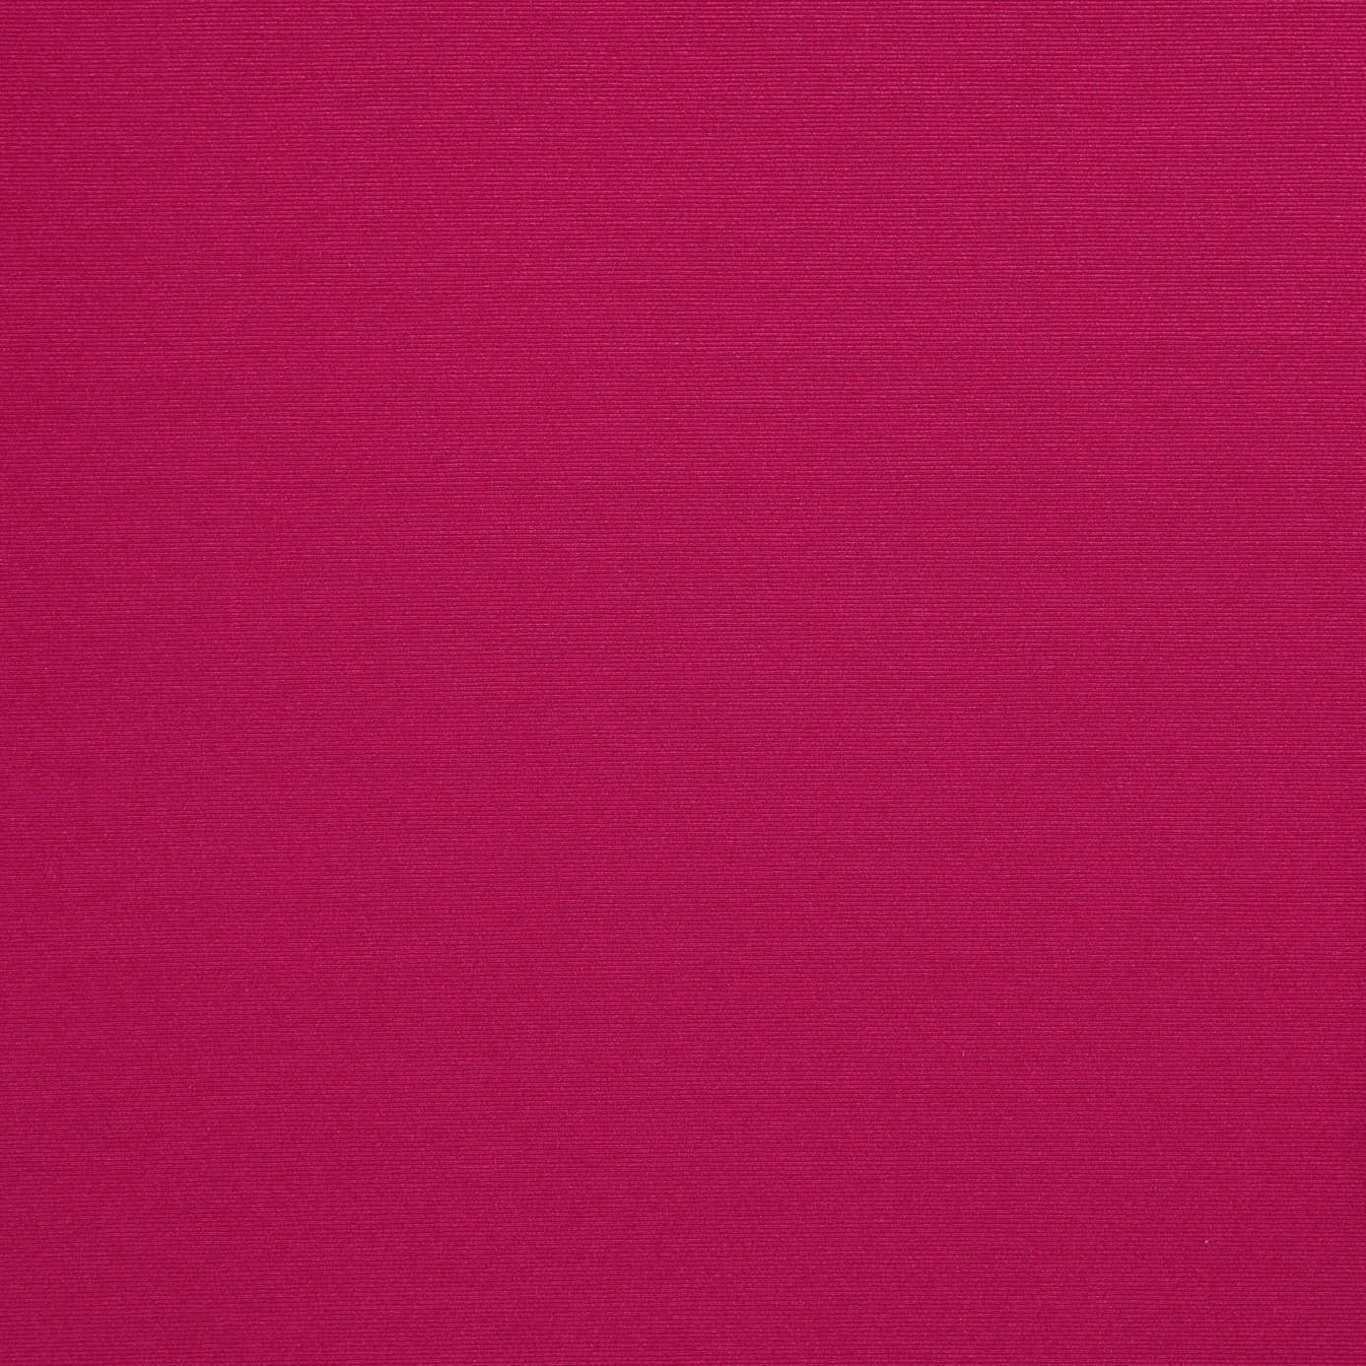 Optix Carnival Pink Fabric by HAR